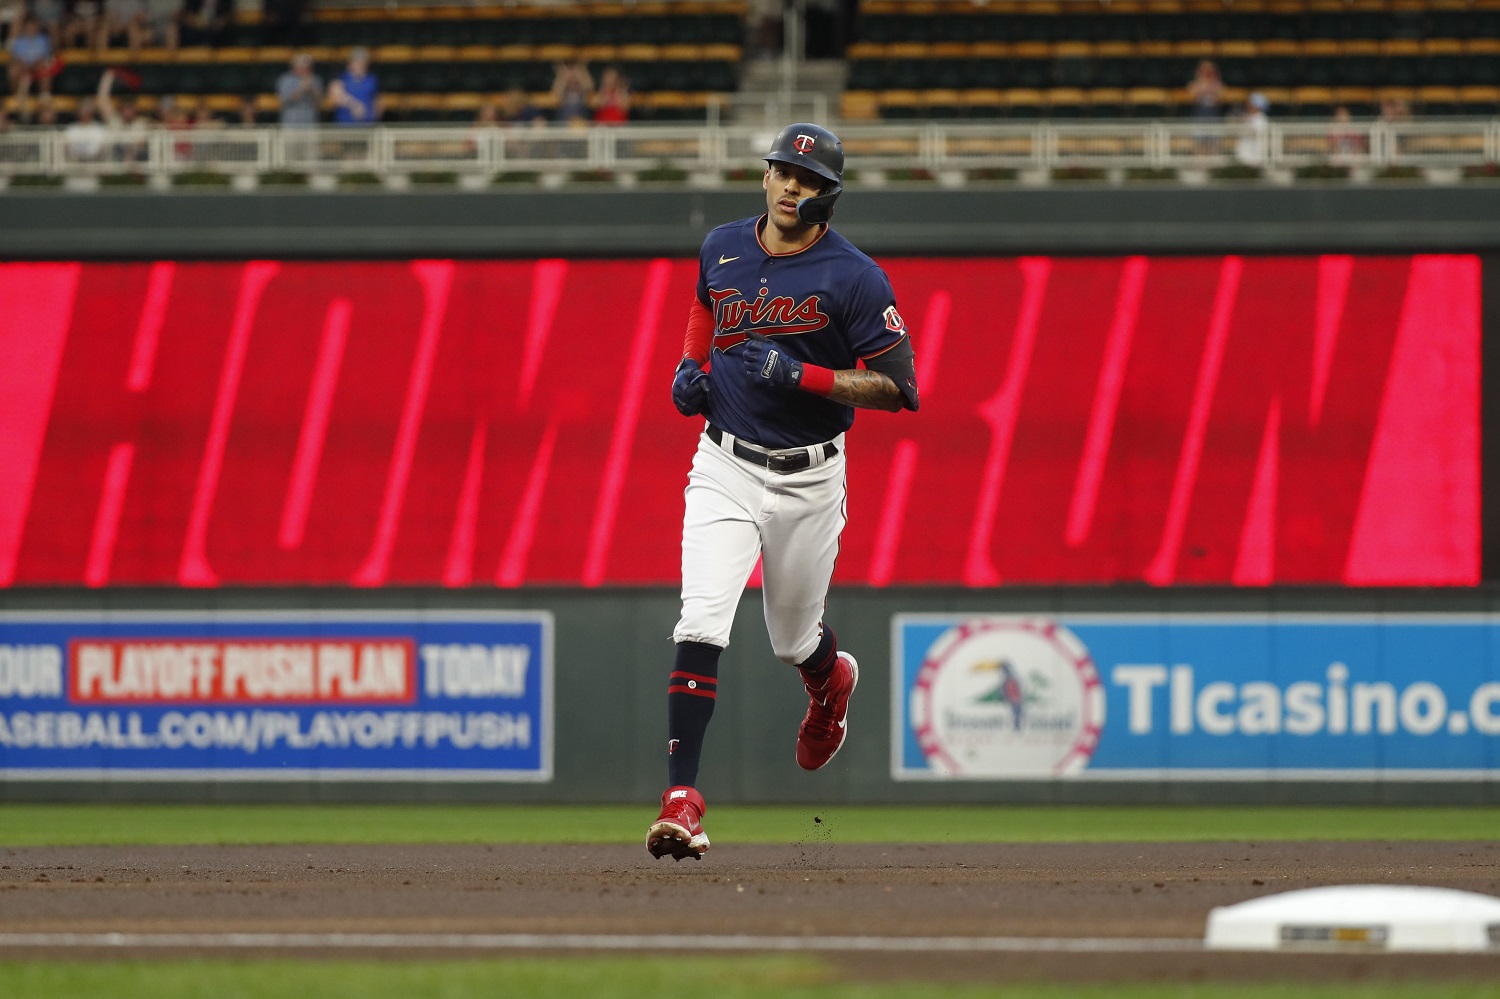 Carlos Correa, Twins need changes, and here are my recommendations